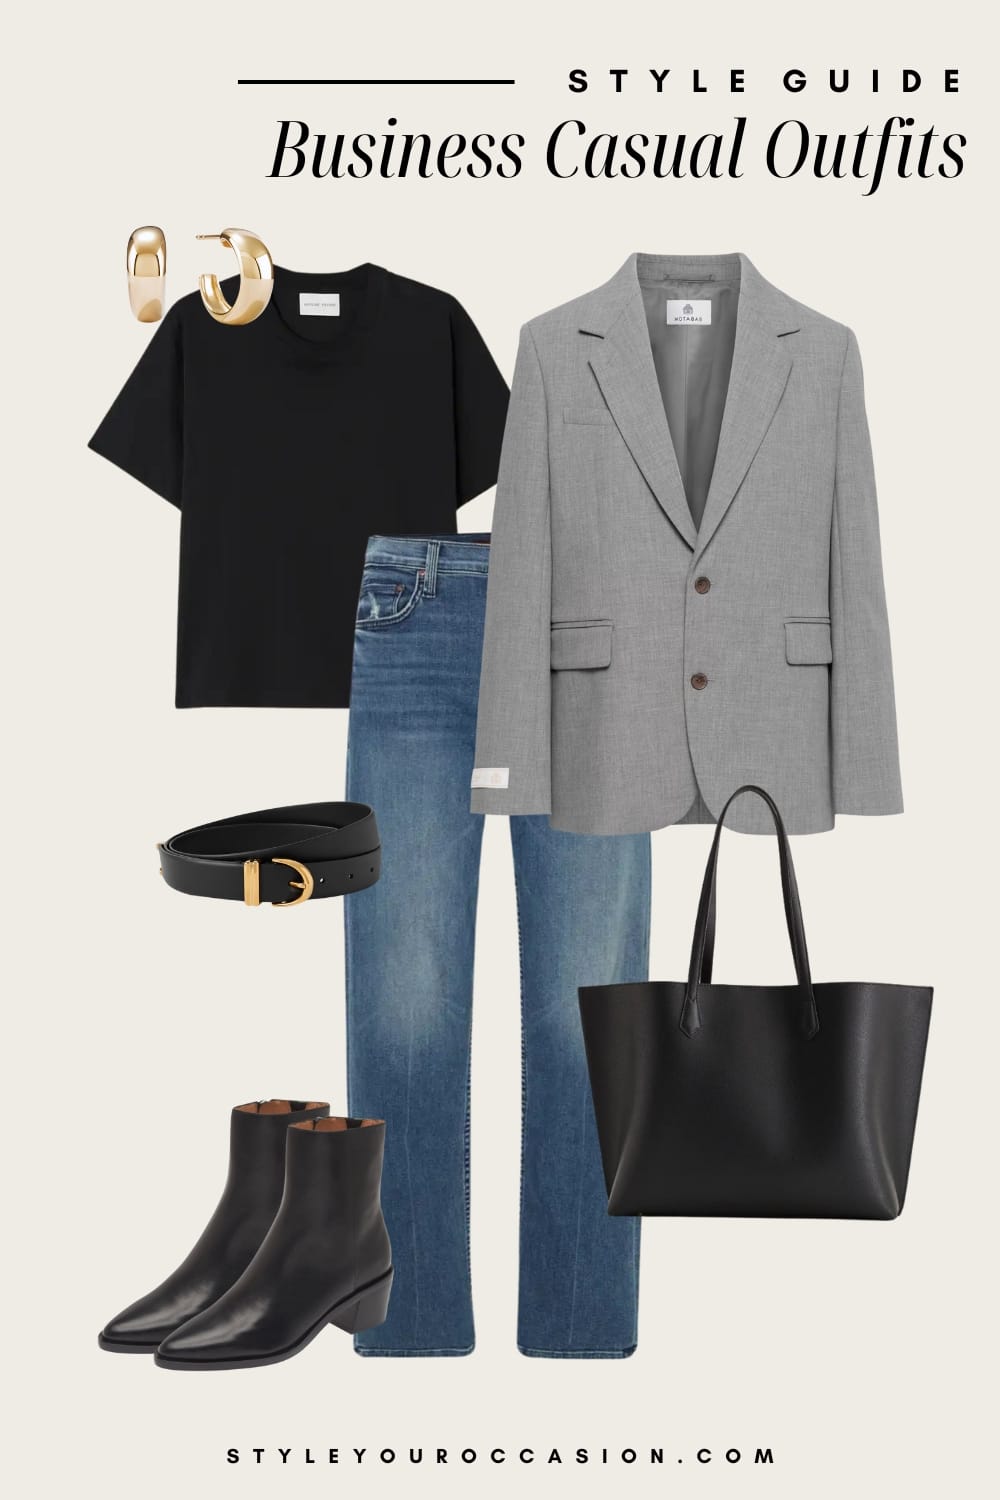 an image board of a business casual outfit featuring blue jeans, a black tee, a light grey blazer, black ankle boots, and black and gold accessories